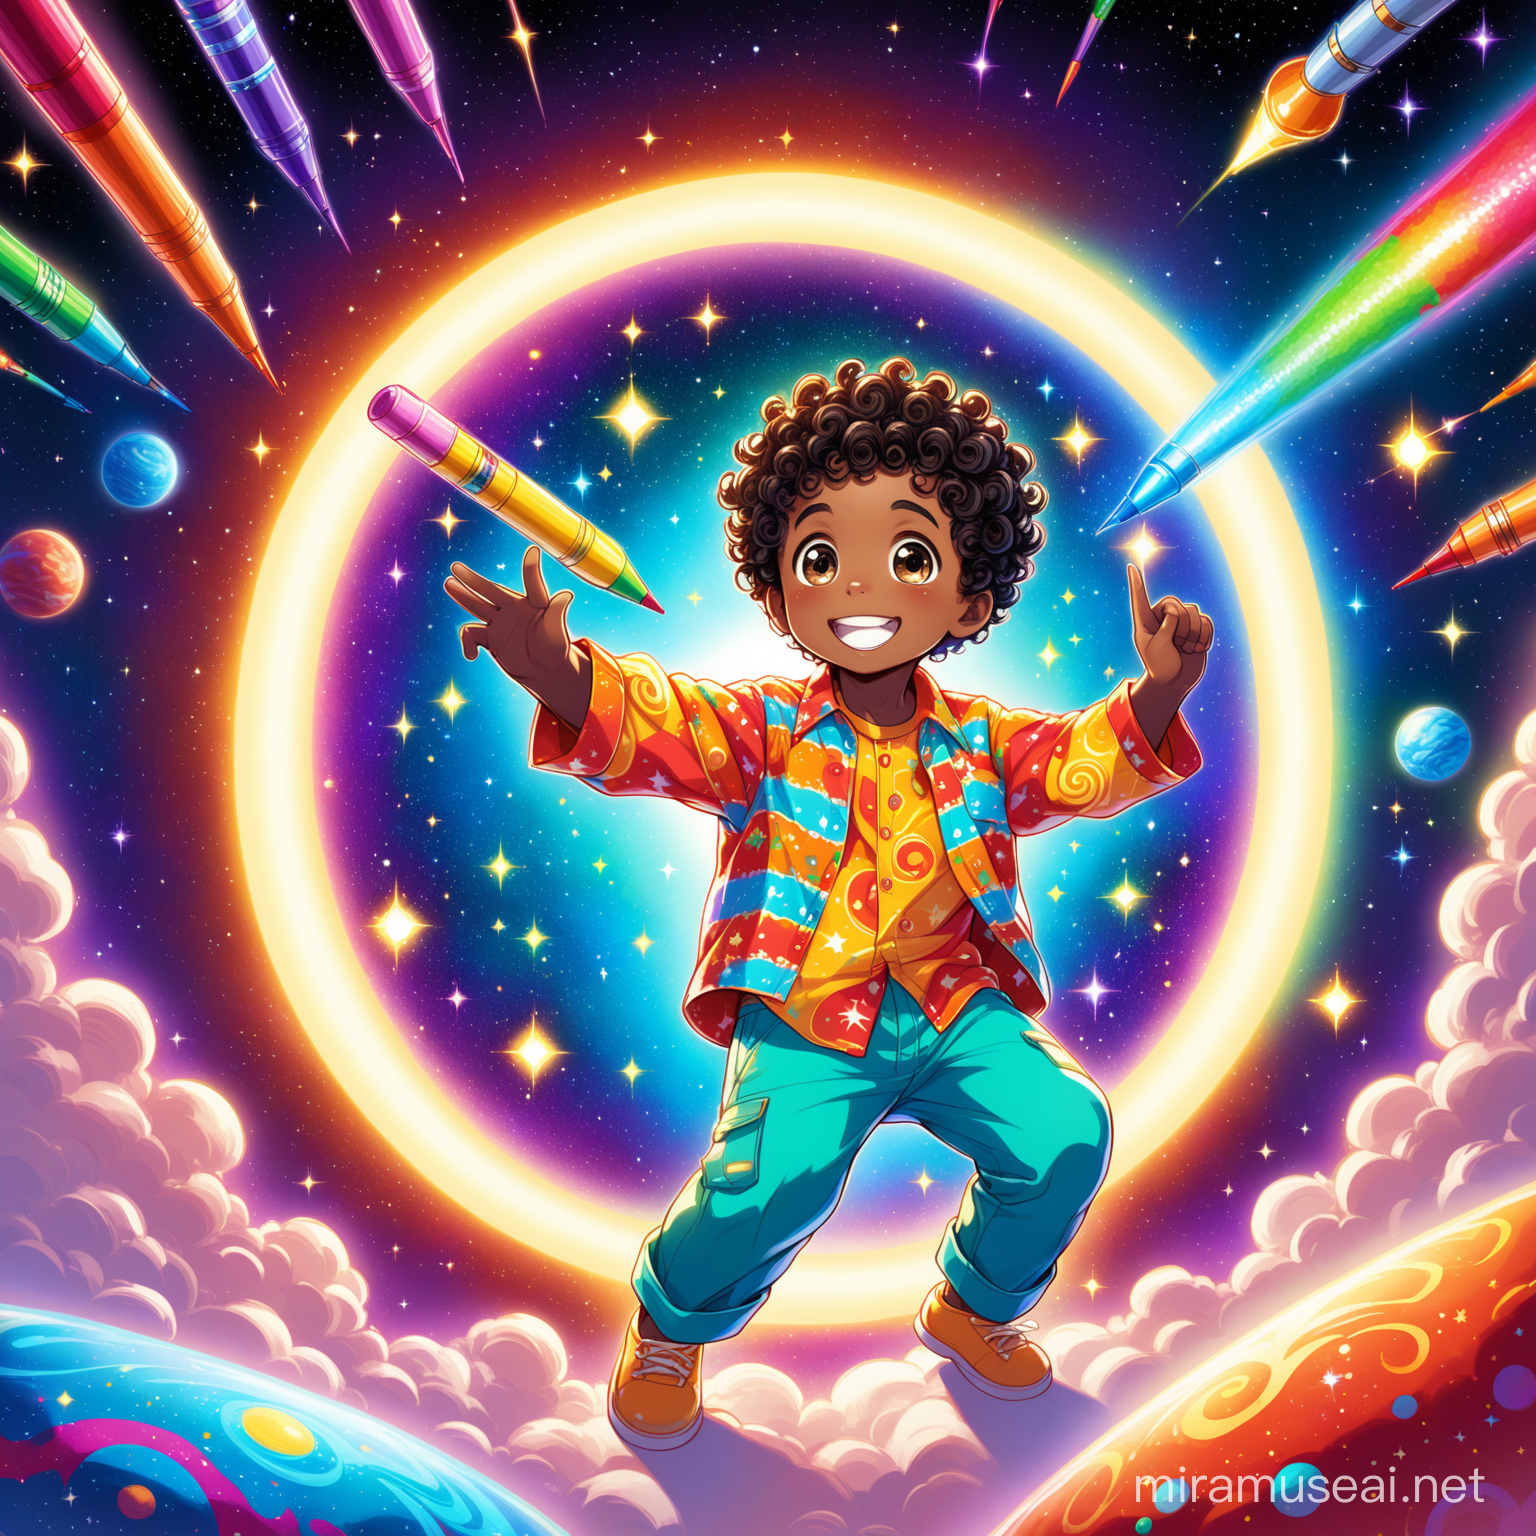 Curious Black Boy with Bright Eyes Drawing near Space Portal